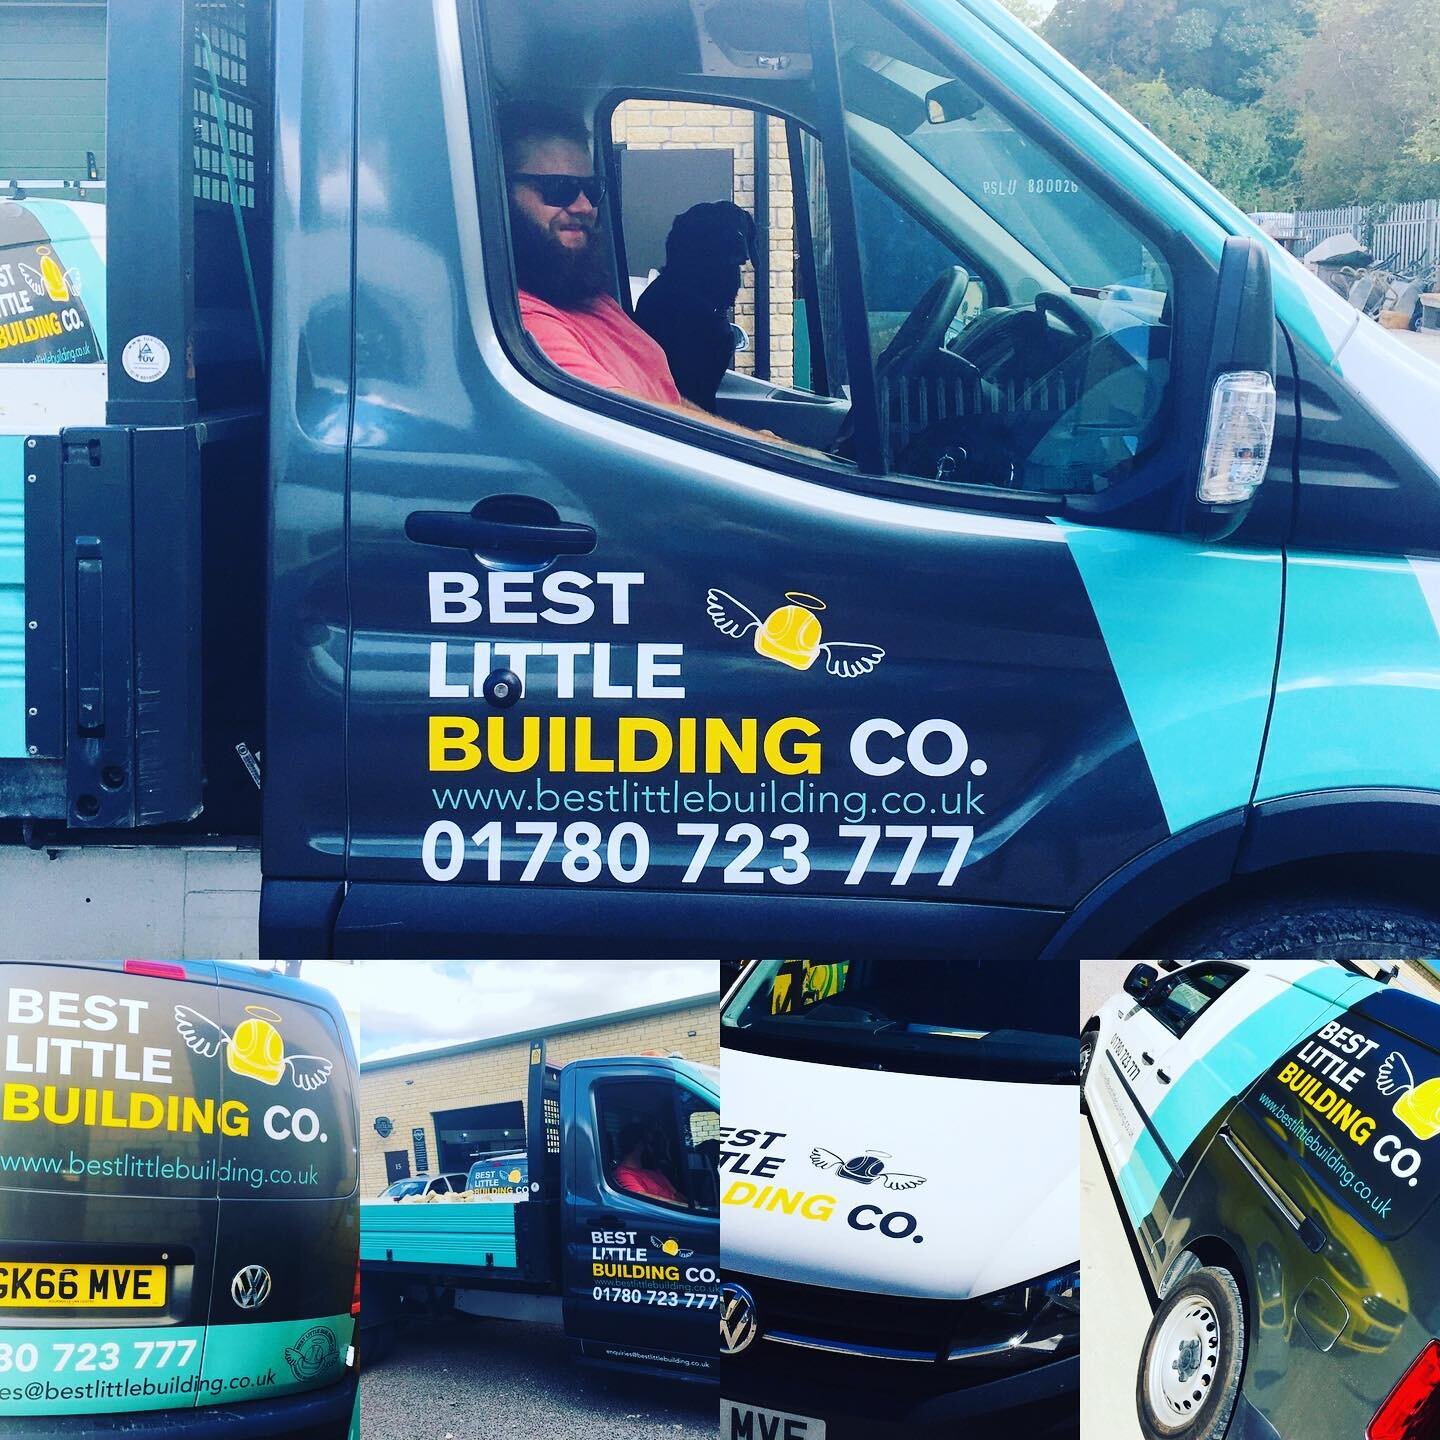 I do vehicle graphics too! Here&rsquo;s a tipper hot off the press. This one came back from the printer @corbygraphixltd with a bearded man and a black lab on the front seat. Bargain!🧔🏻🐶#vehiclegraphics #vinylwraps @bestlittlebuilding